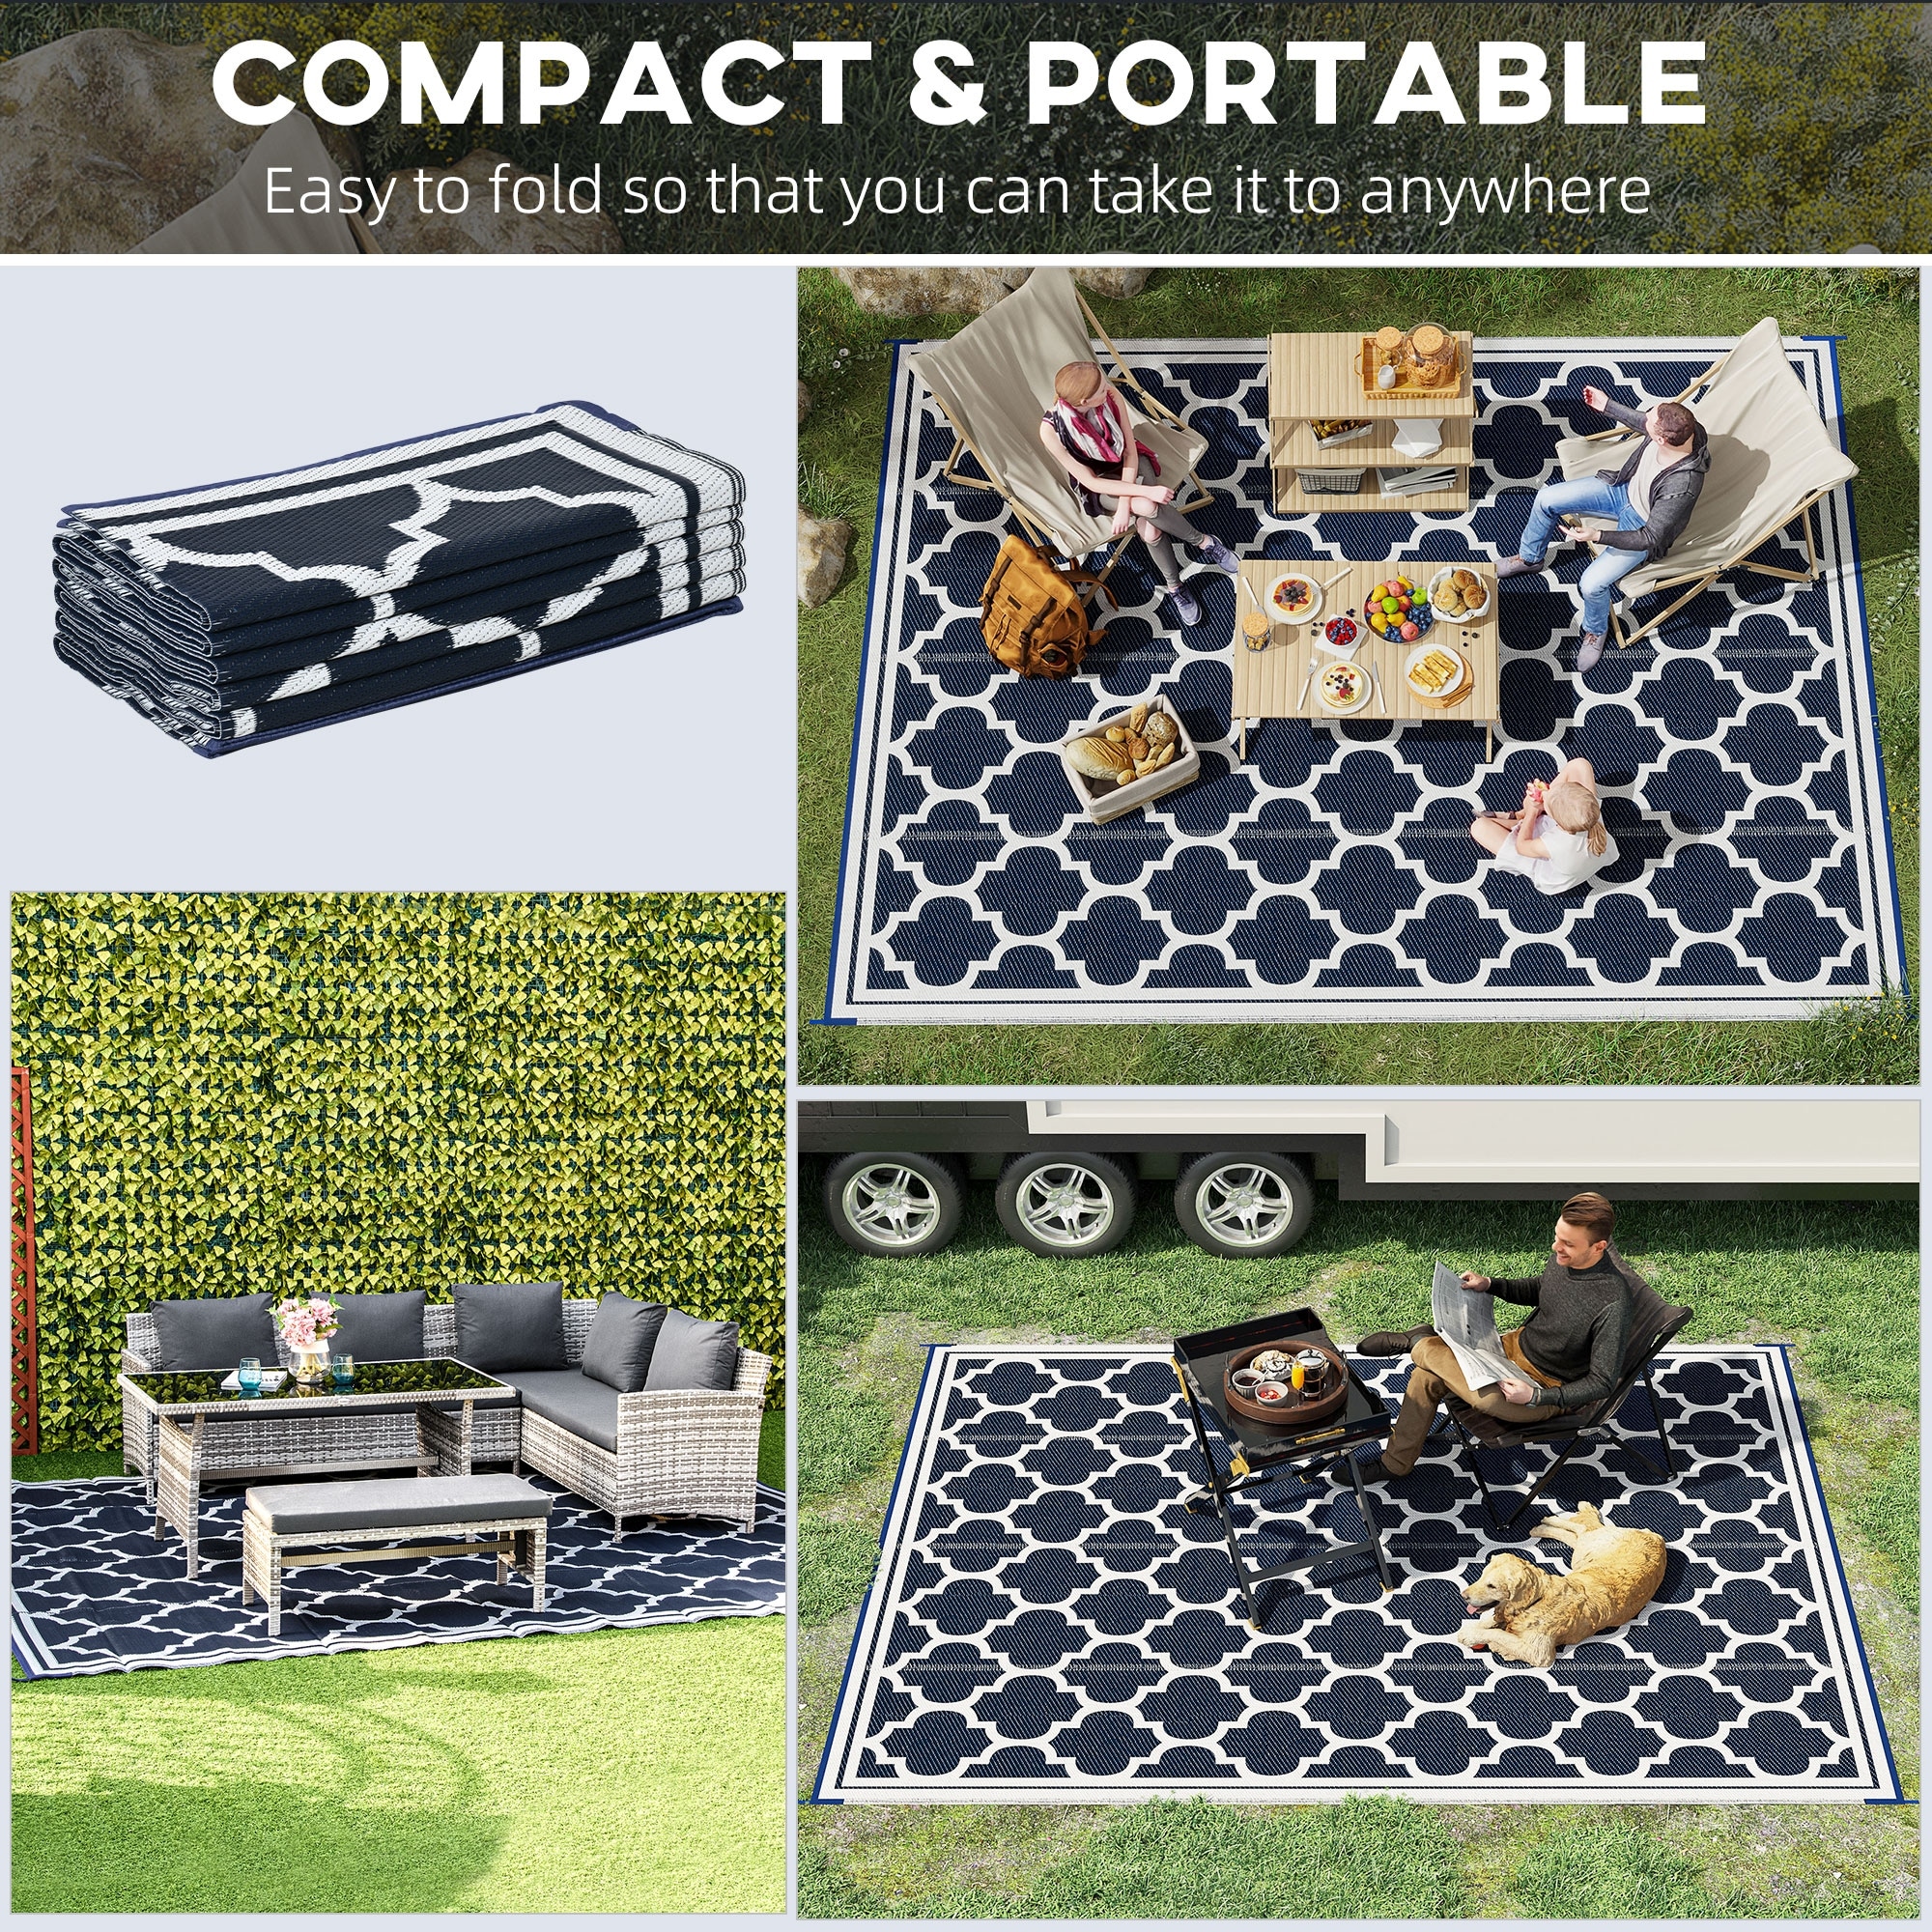 https://ak1.ostkcdn.com/images/products/is/images/direct/61527551cc48be3da4e92e3d13f79b14015643d1/Outsunny-Reversible-Outdoor-RV-Rug%2C-Patio-Floor-Mat%2C-Plastic-Straw-Rug-for-Backyard%2C-Deck%2C-Picnic%2C-Beach%2C-Camping.jpg